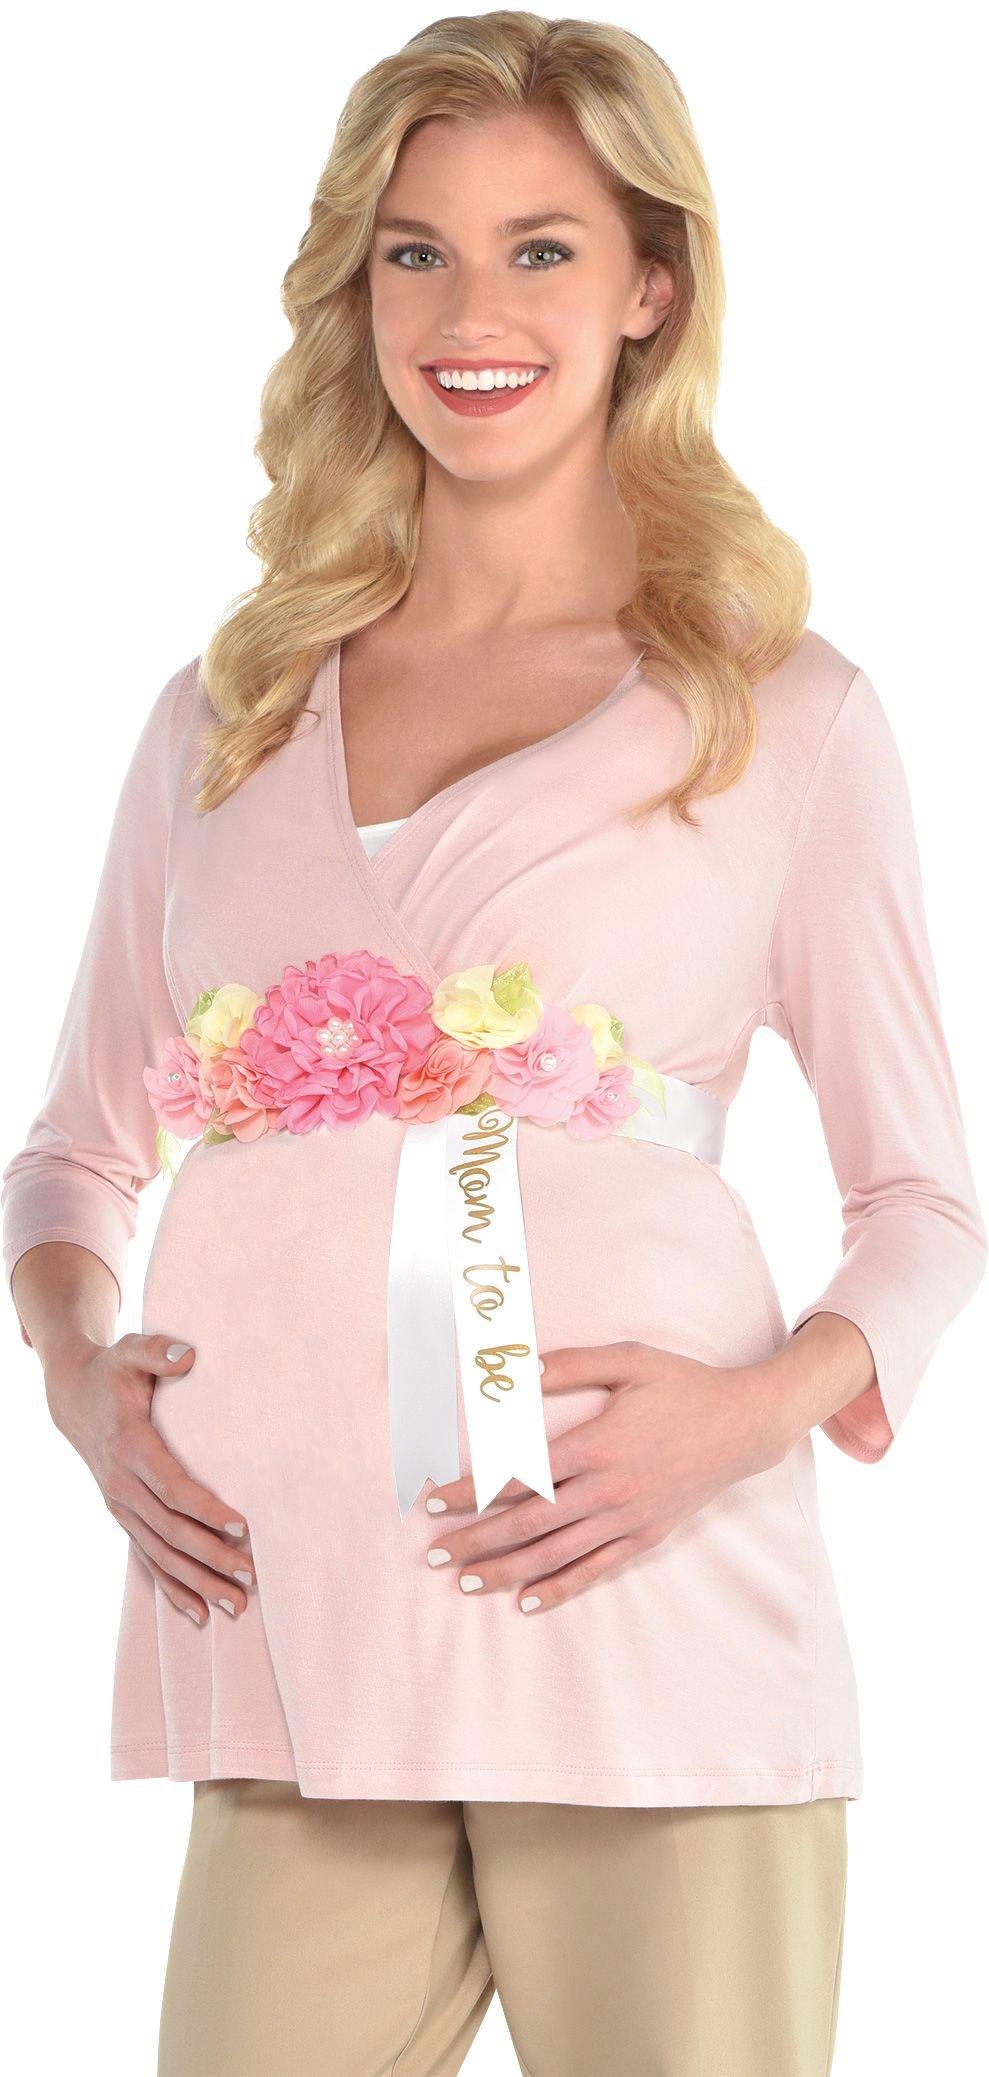 Floral Baby Shower Mom-to-Be Ribbon Sash 4ft